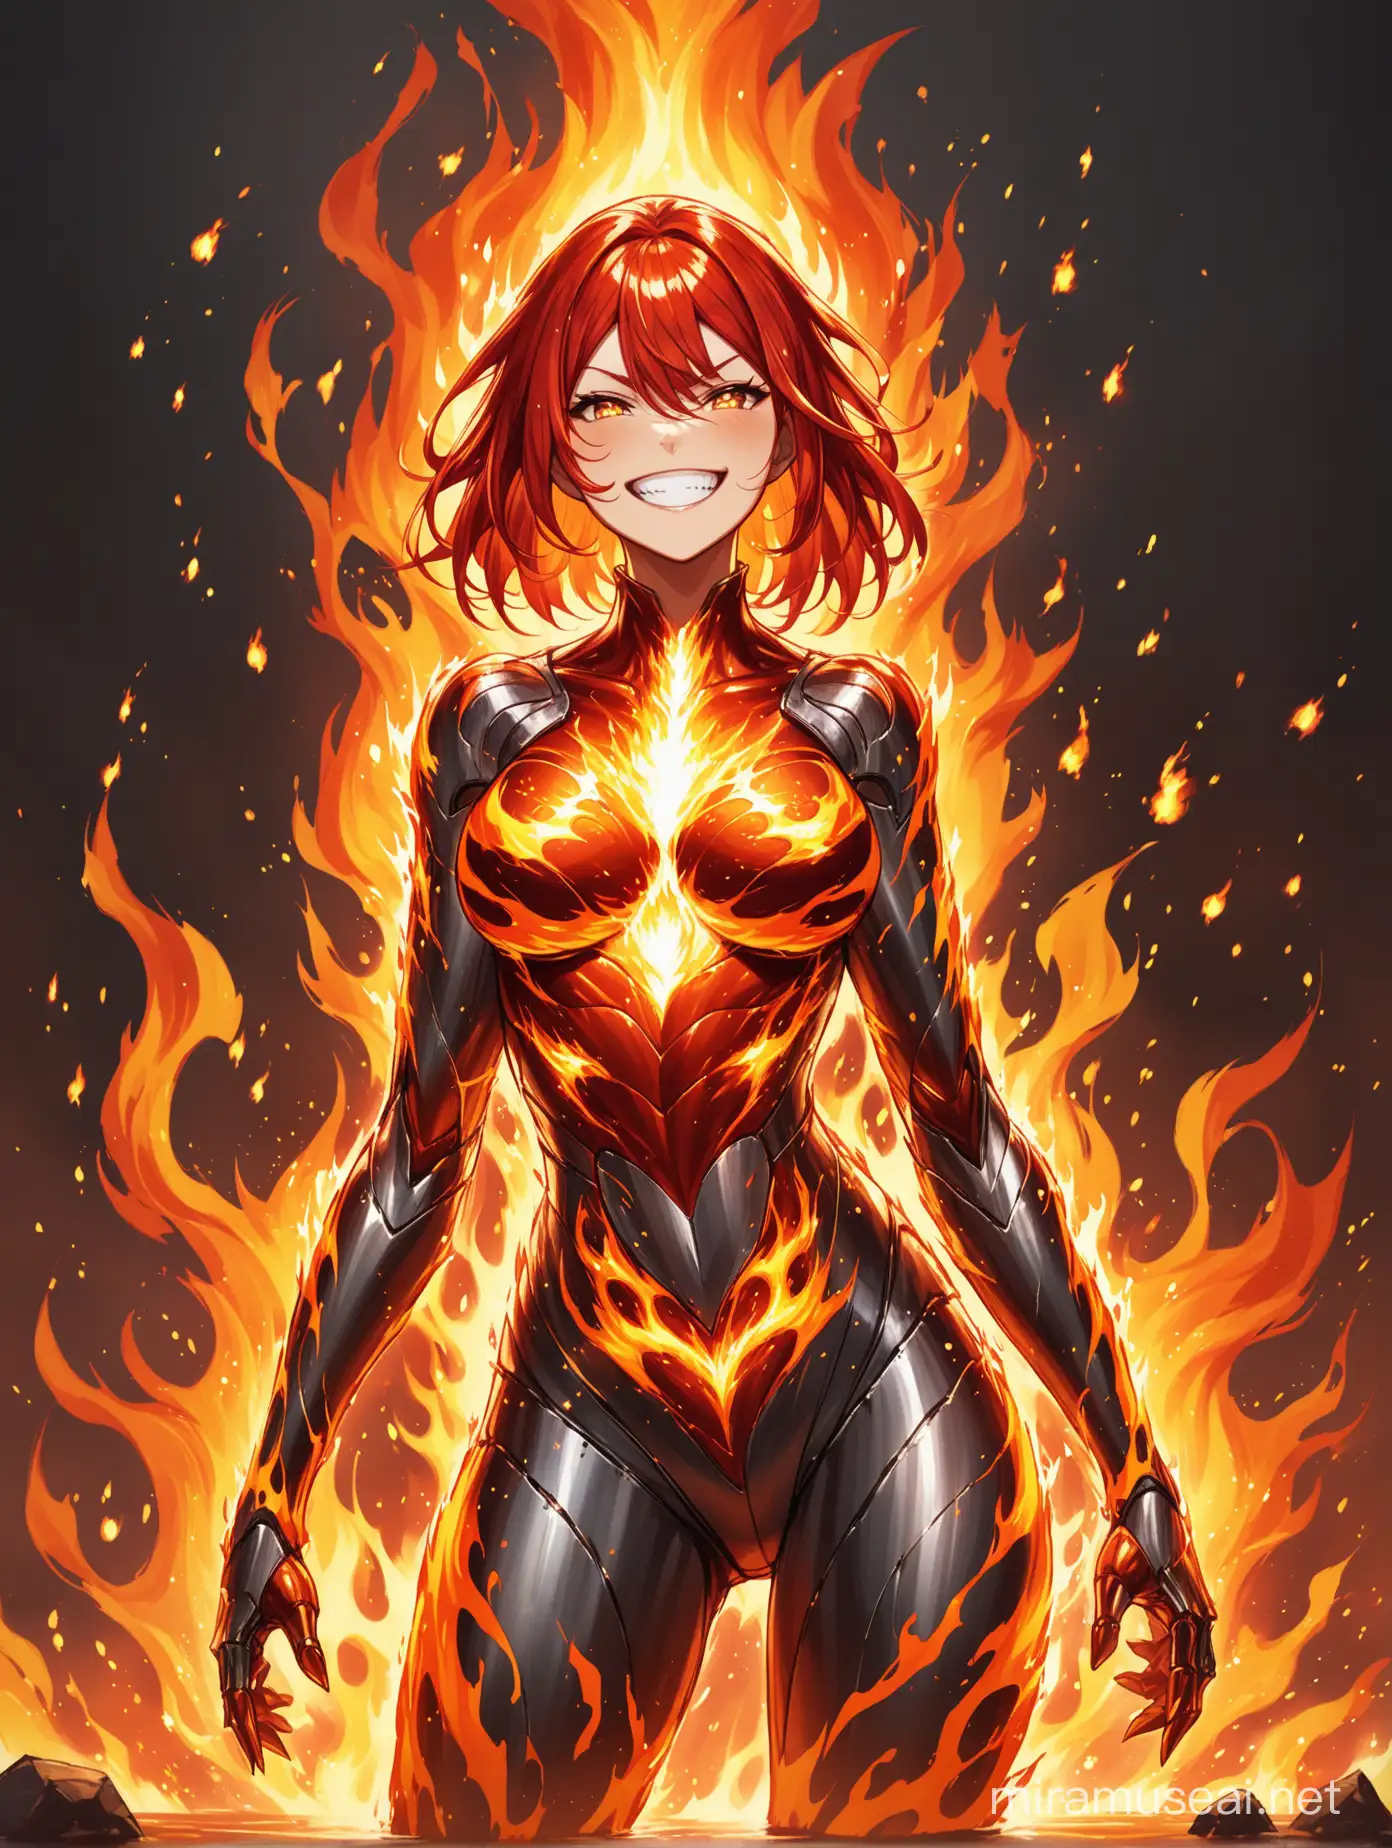 Smiling Fire Elemental Girl with Metallic Form and Fiery Splashes